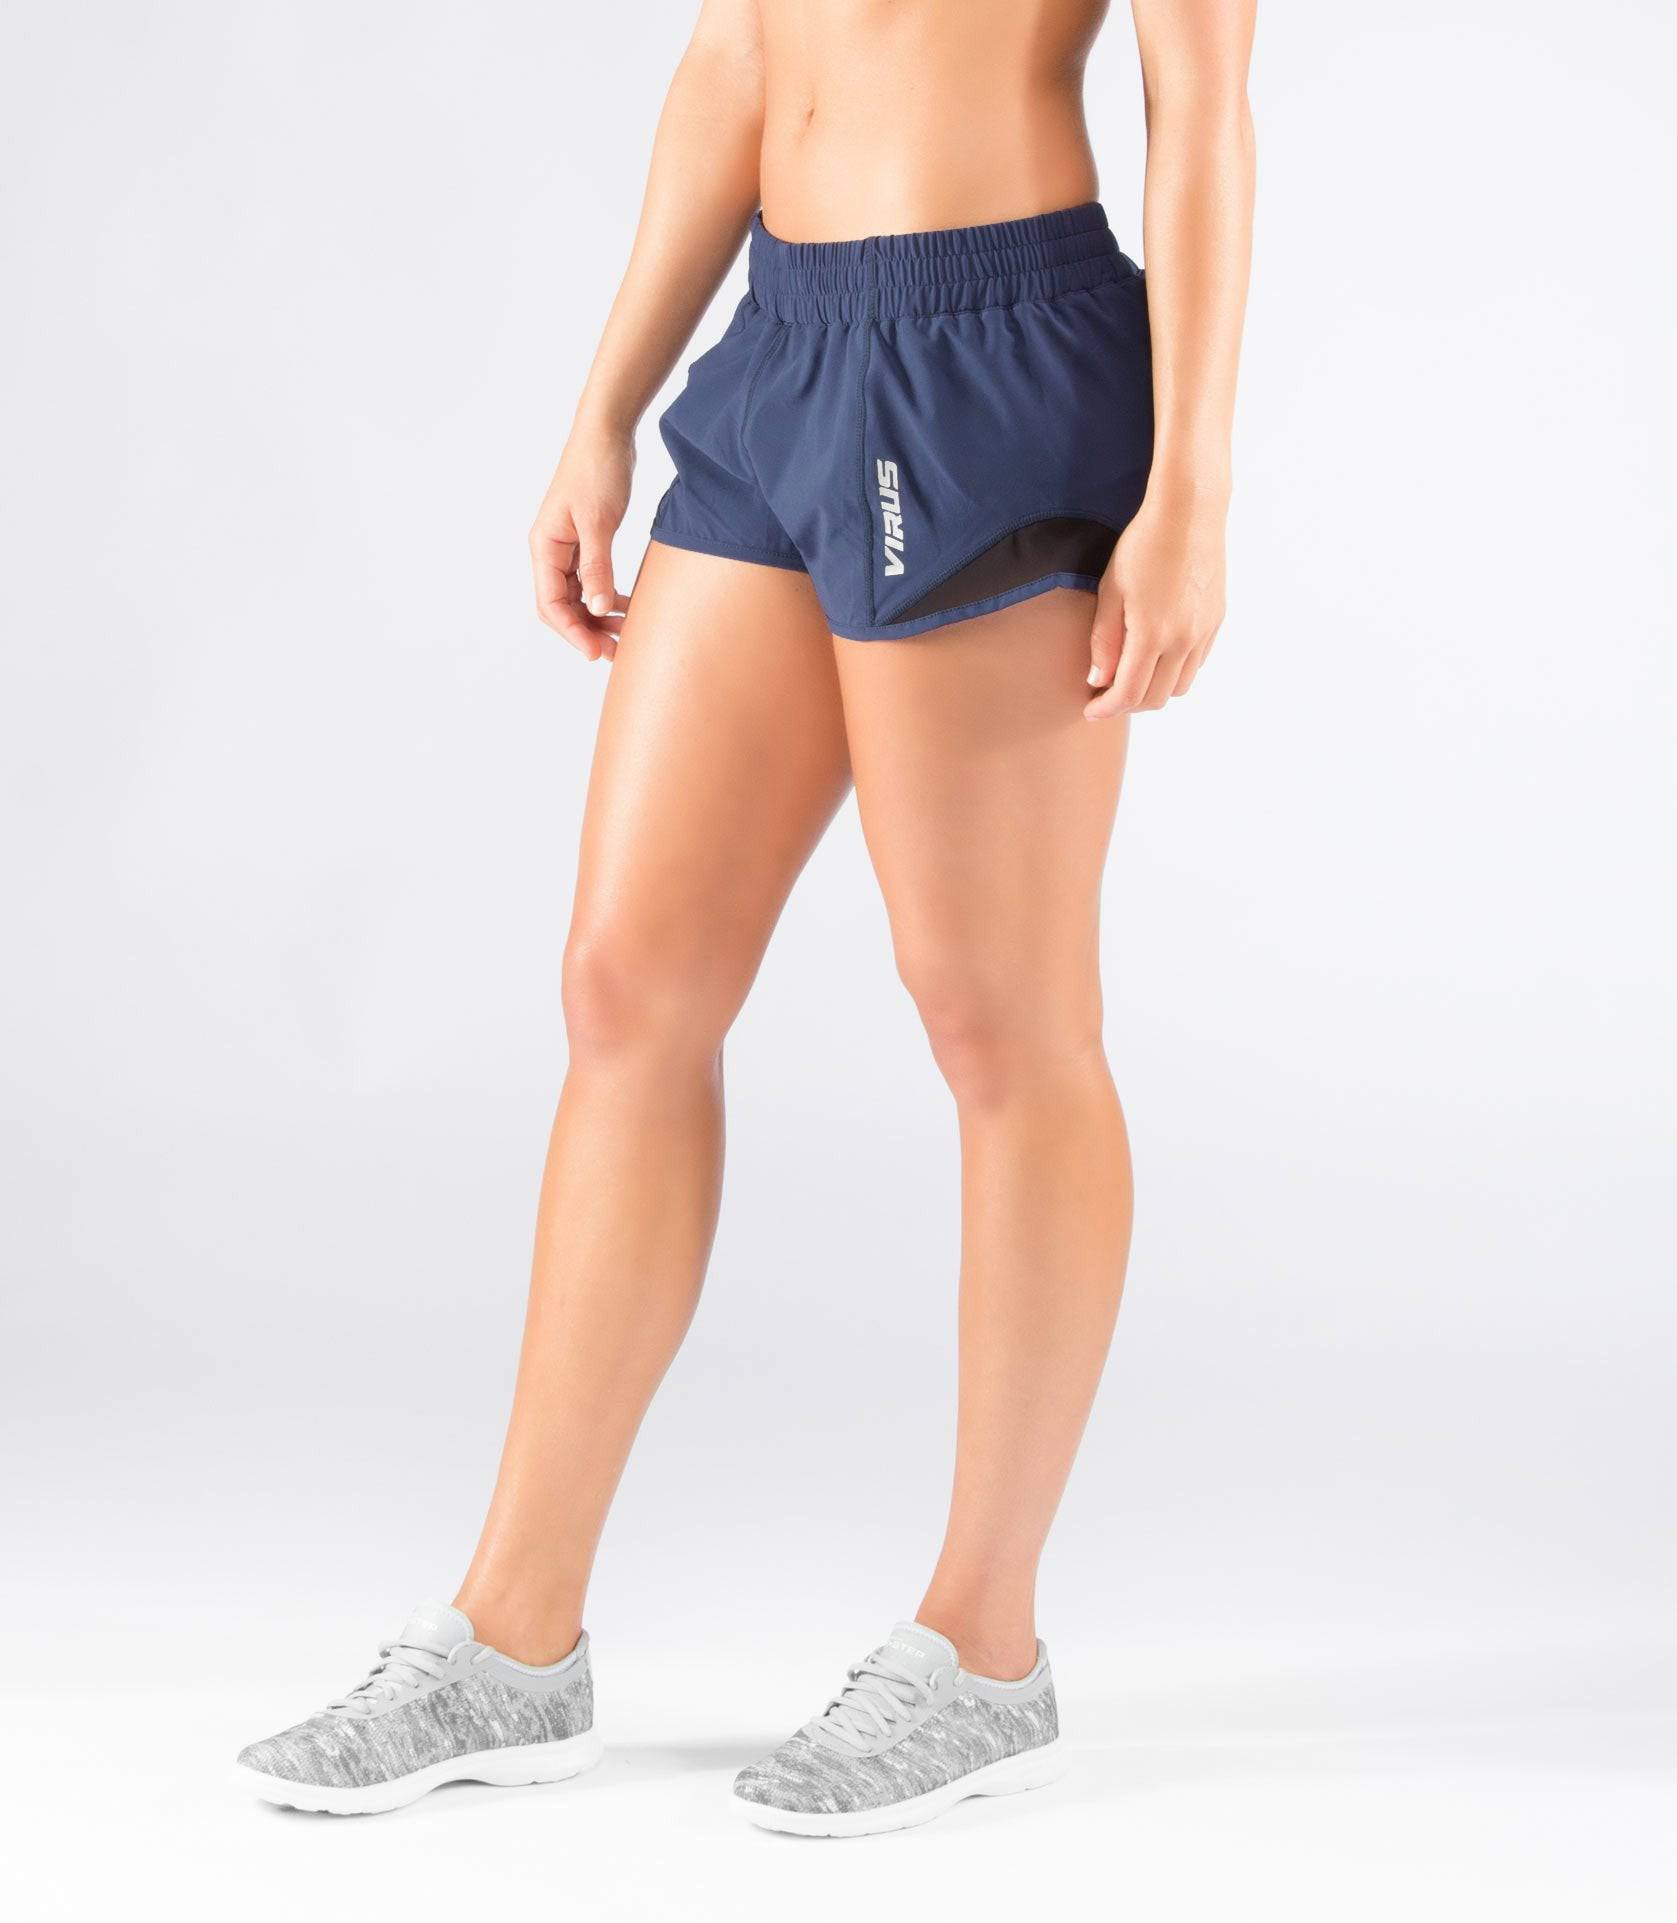 Virus, ECO25 Women's Loose Fit Trace Shorts